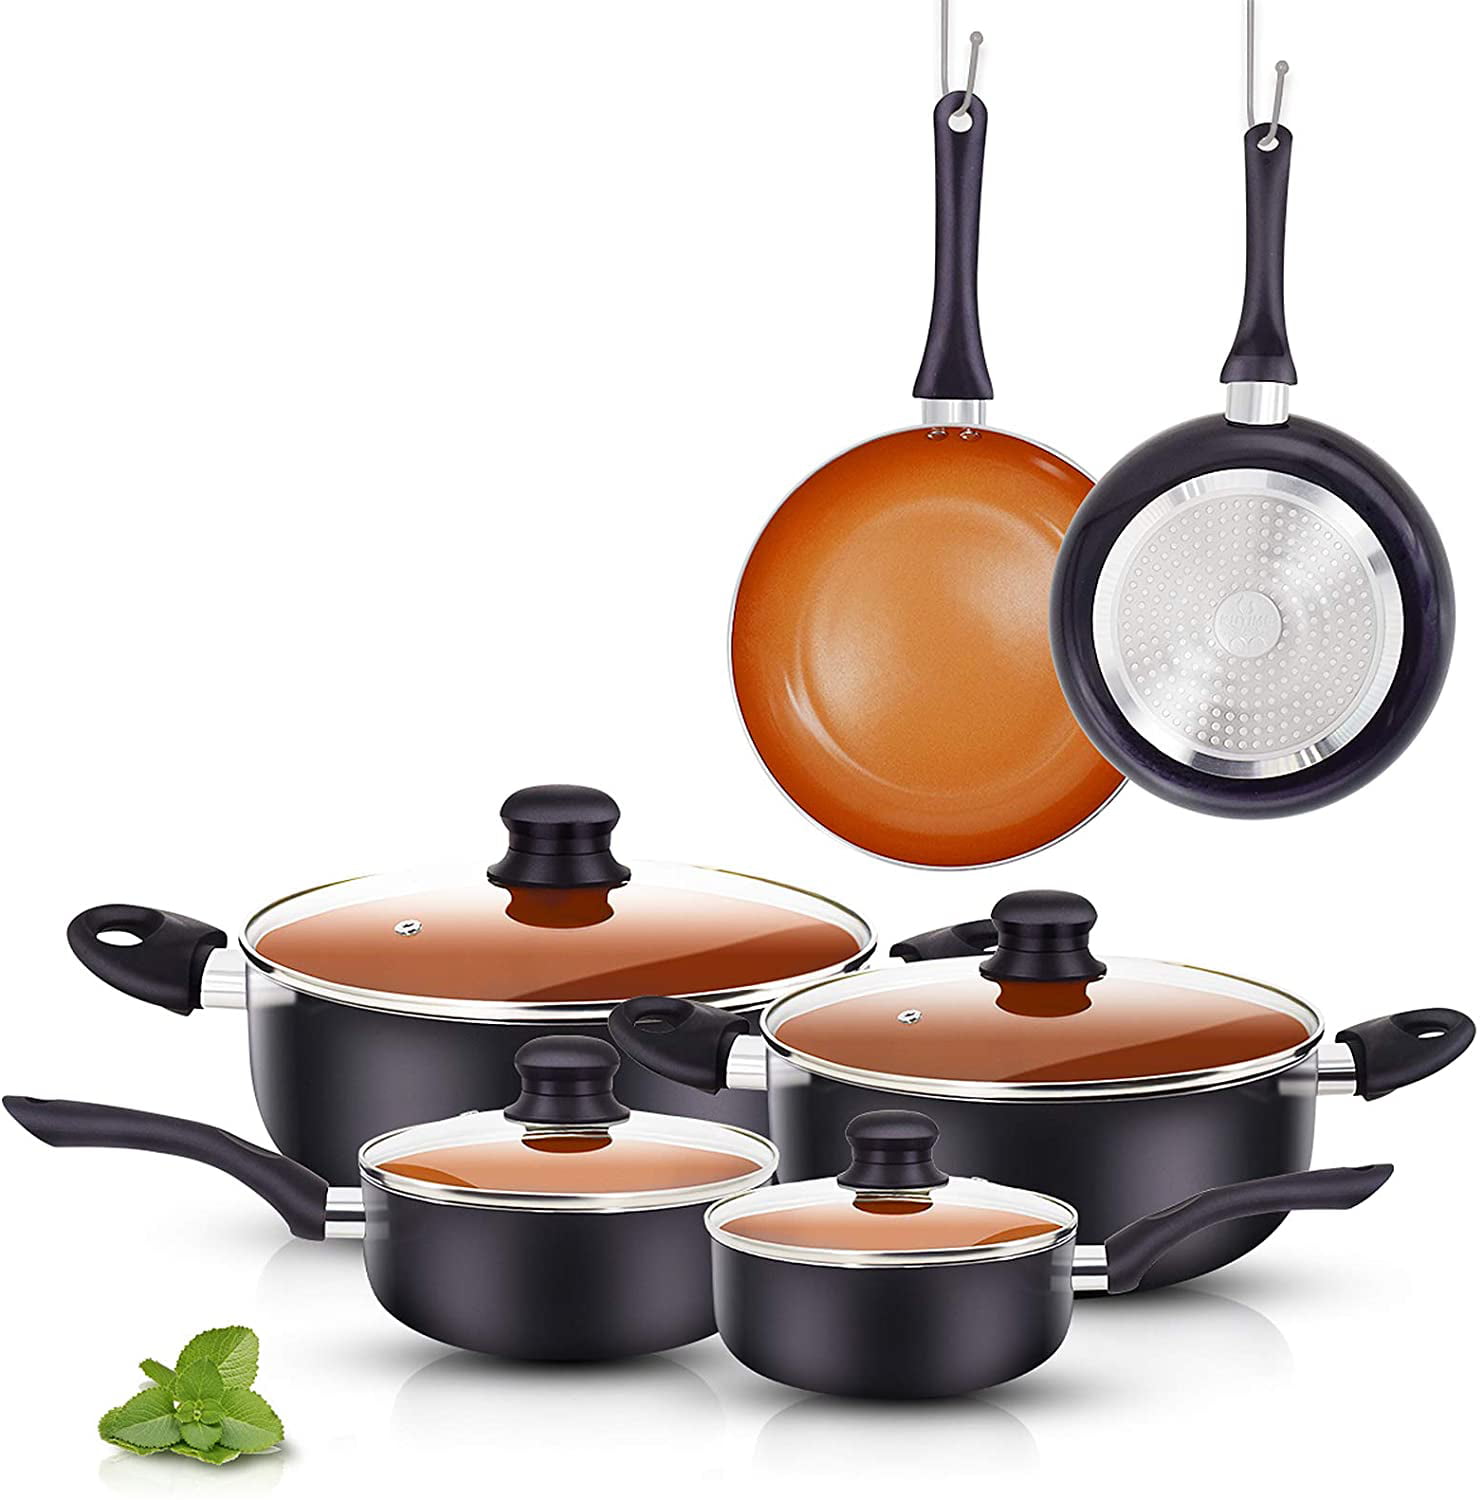 Cookware Set for Gas 7in Milk Pot with Lid 8/11in Fry Pans 1 Year Warranty KI Pots and Pans Set Ceramic Non-Stick Free Gift 1 Pancake Turner